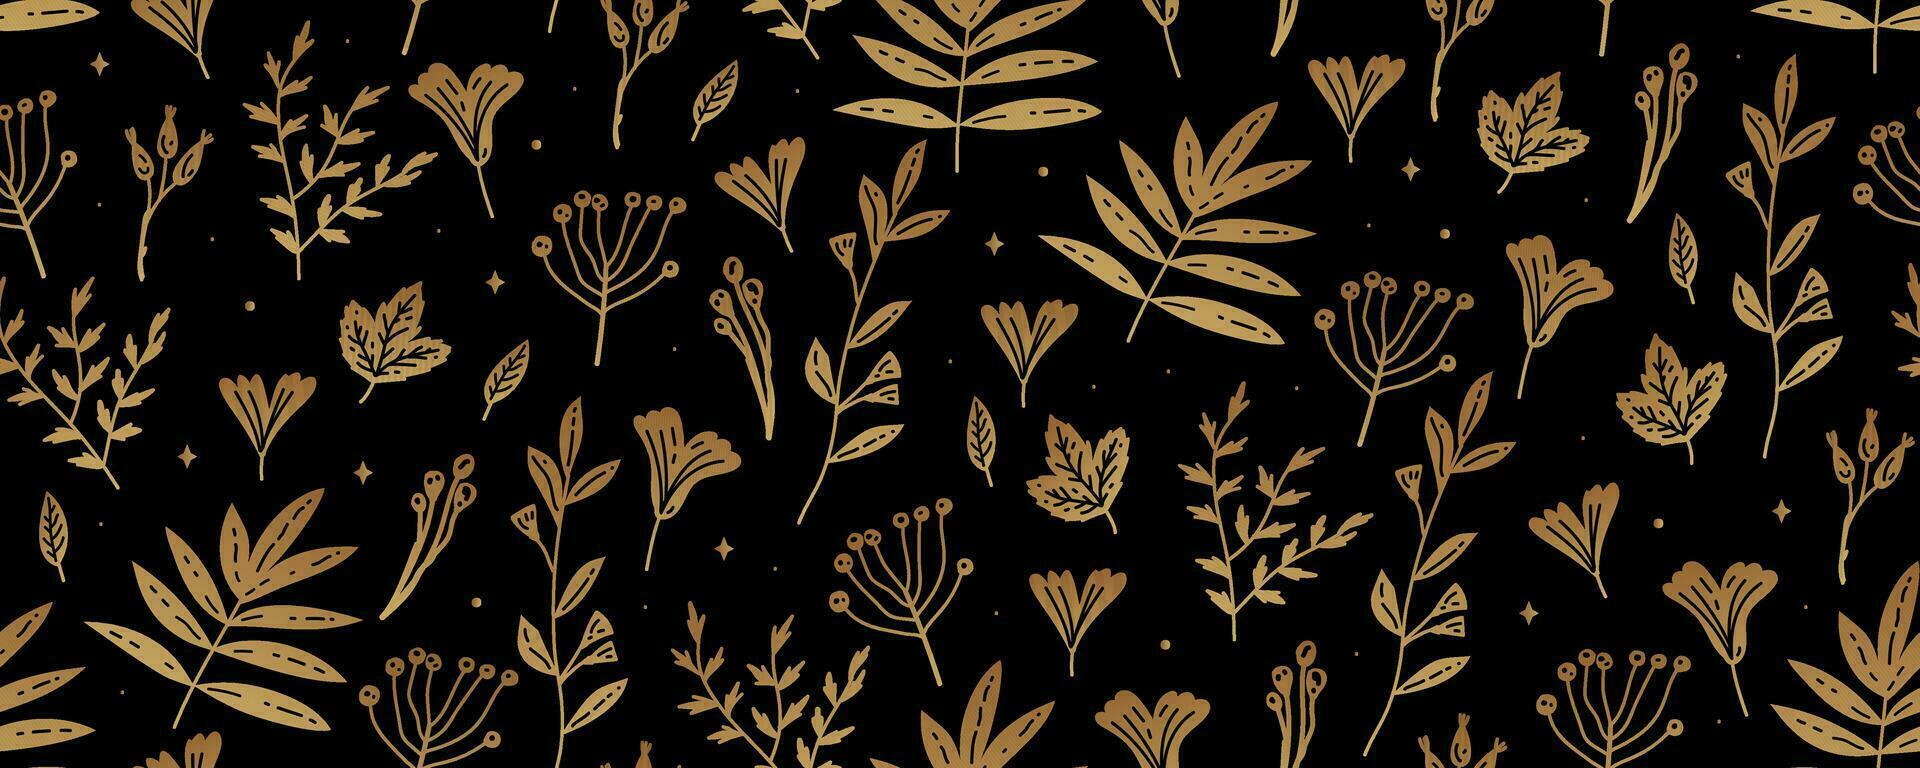 Golden art decoration illustration. Luxury seamless pattern with gold leaves. vector